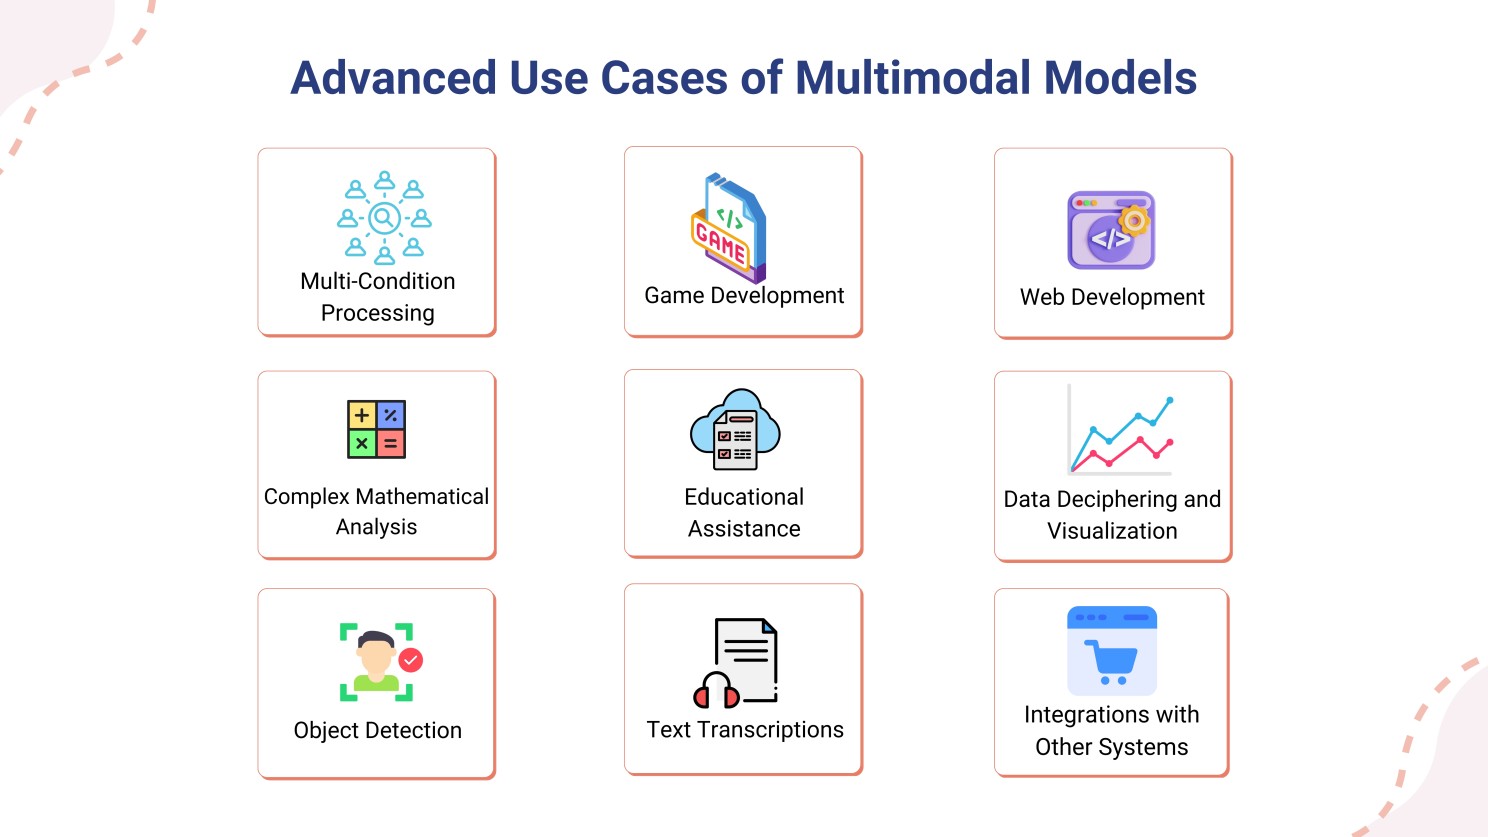 Advanced Use Cases of Multimodal Models